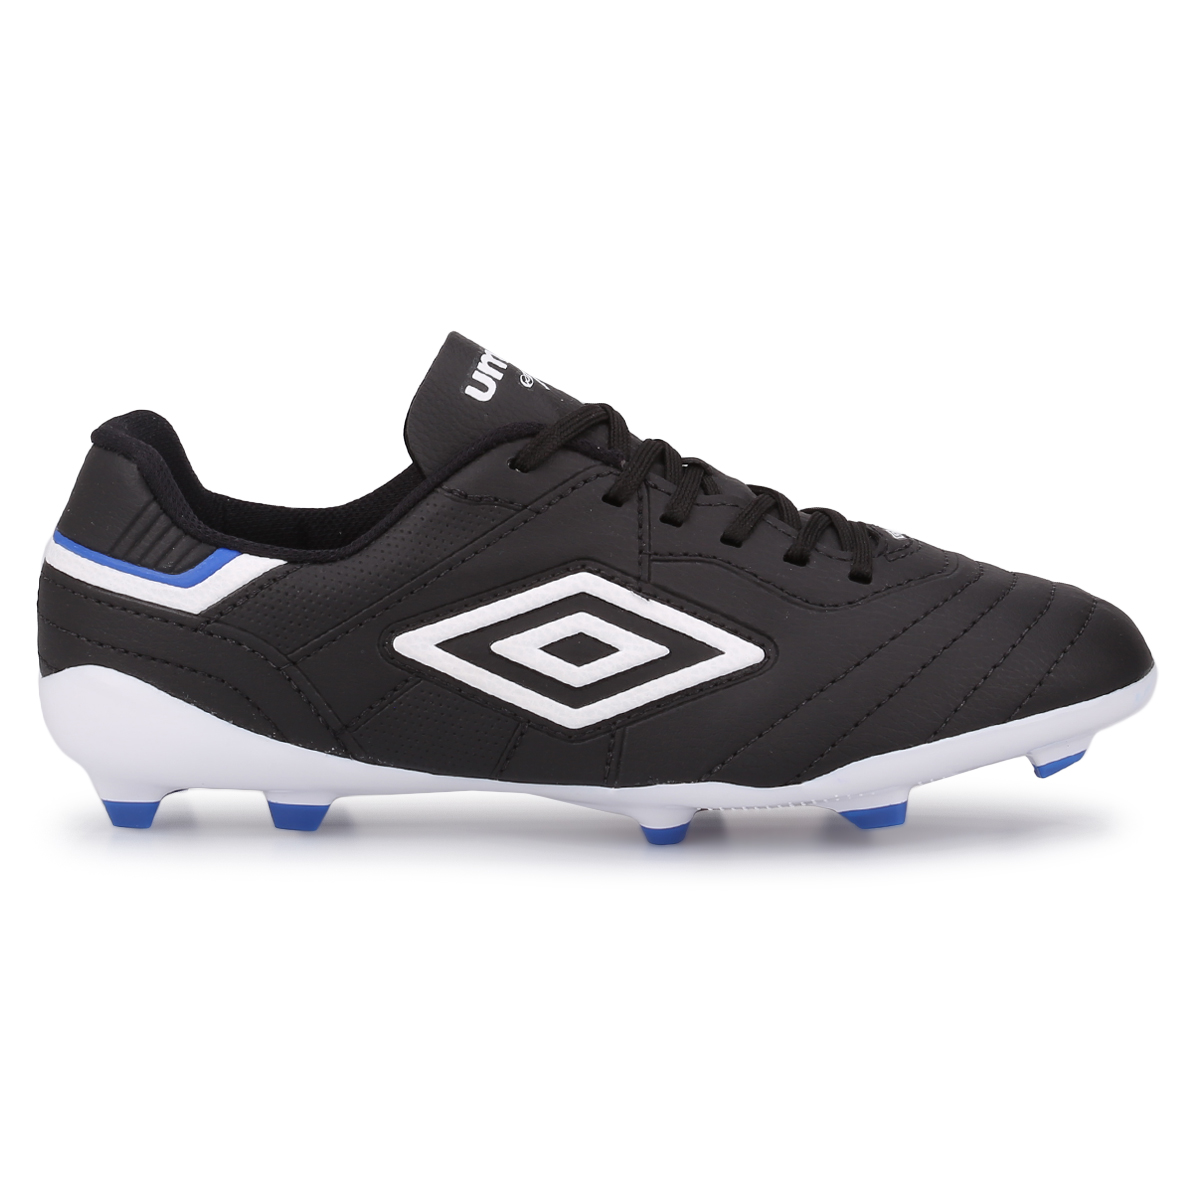 Botines Umbro Speciali III League Campo,  image number null